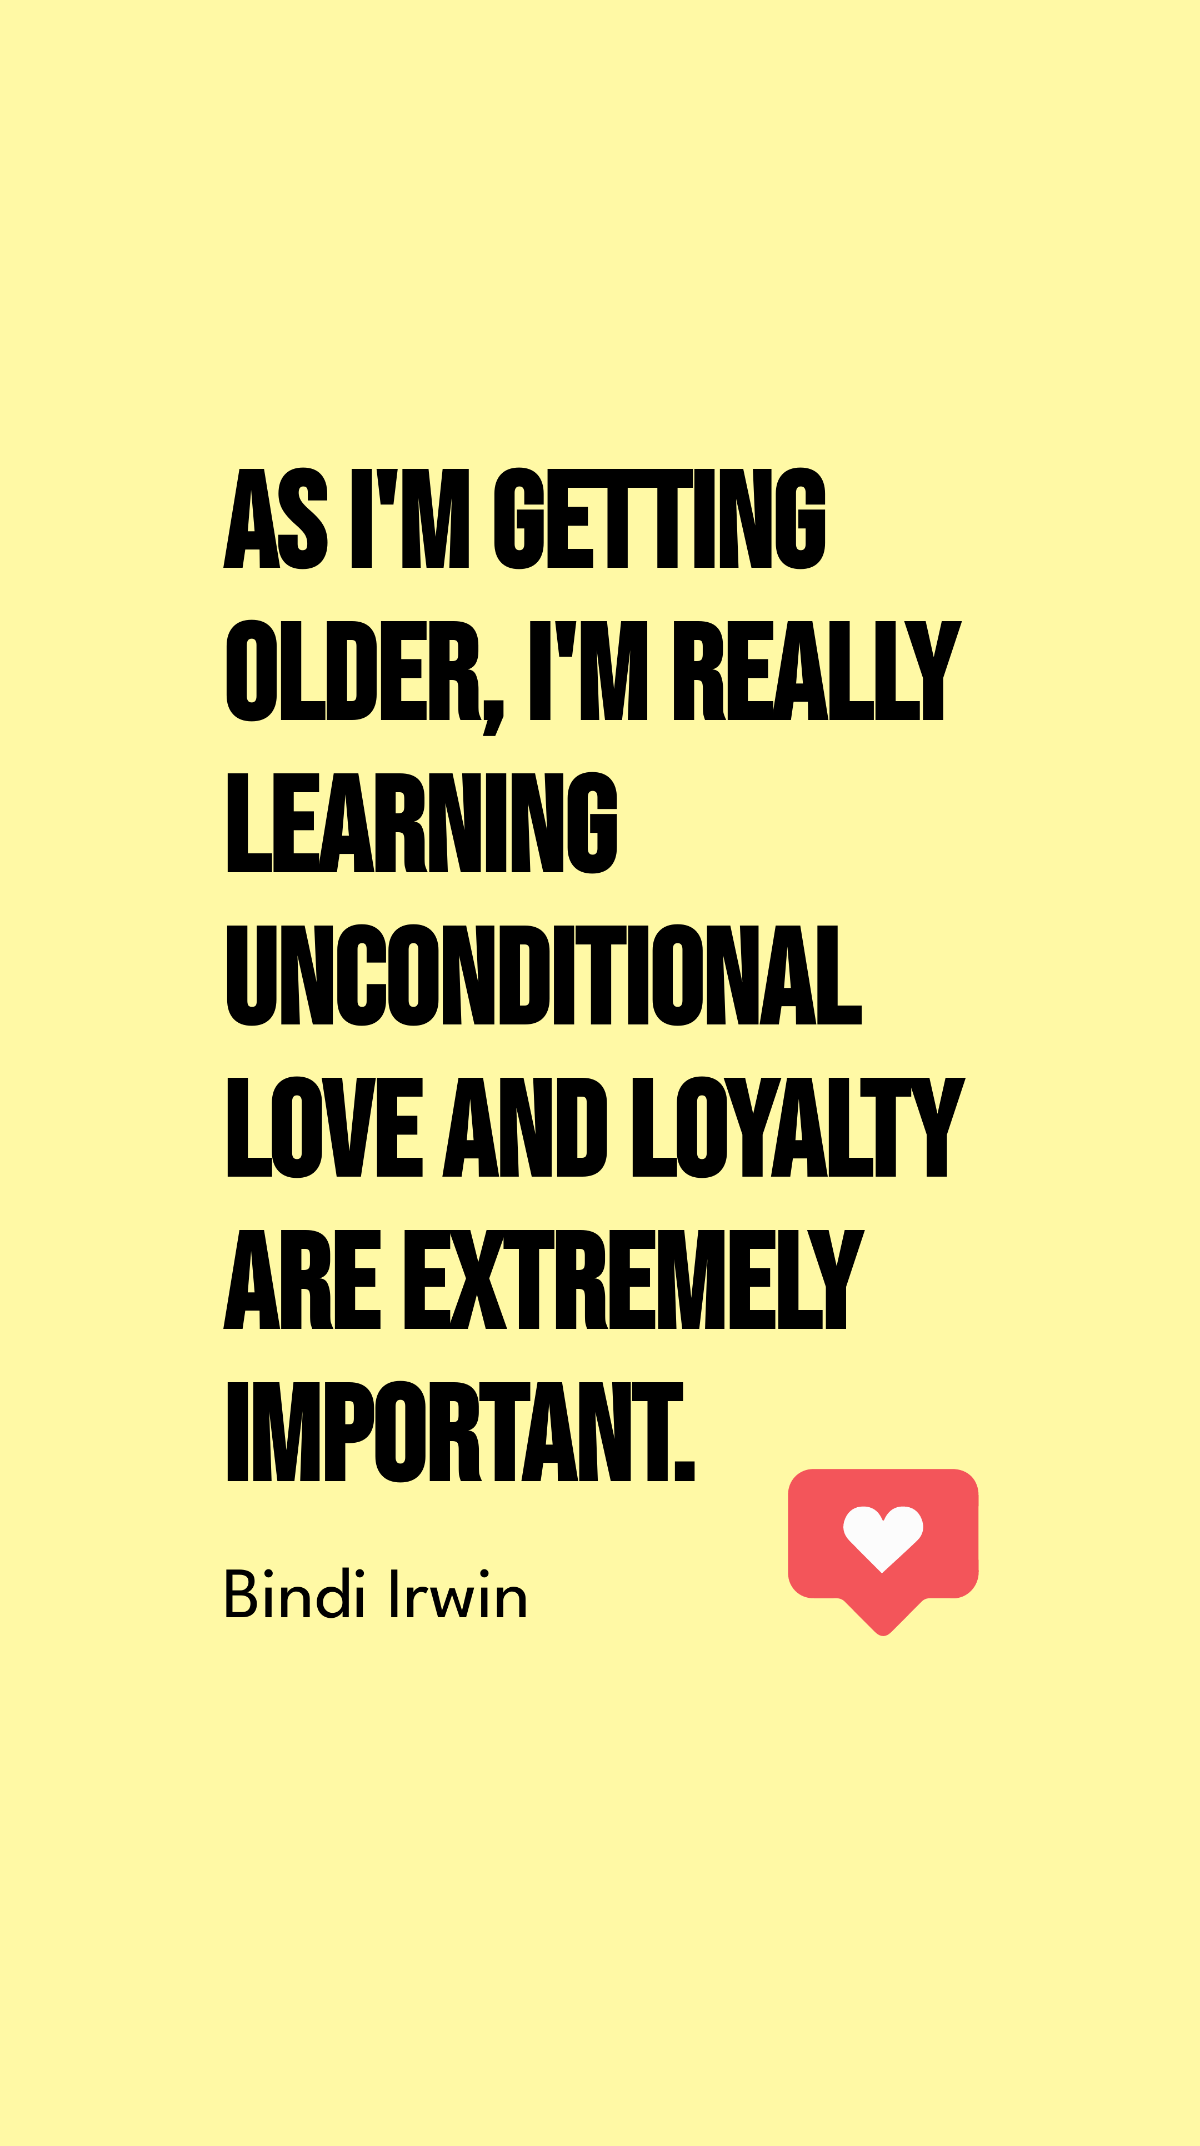 Bindi Irwin- As I'm getting older, I'm really learning unconditional love and loyalty are extremely important.